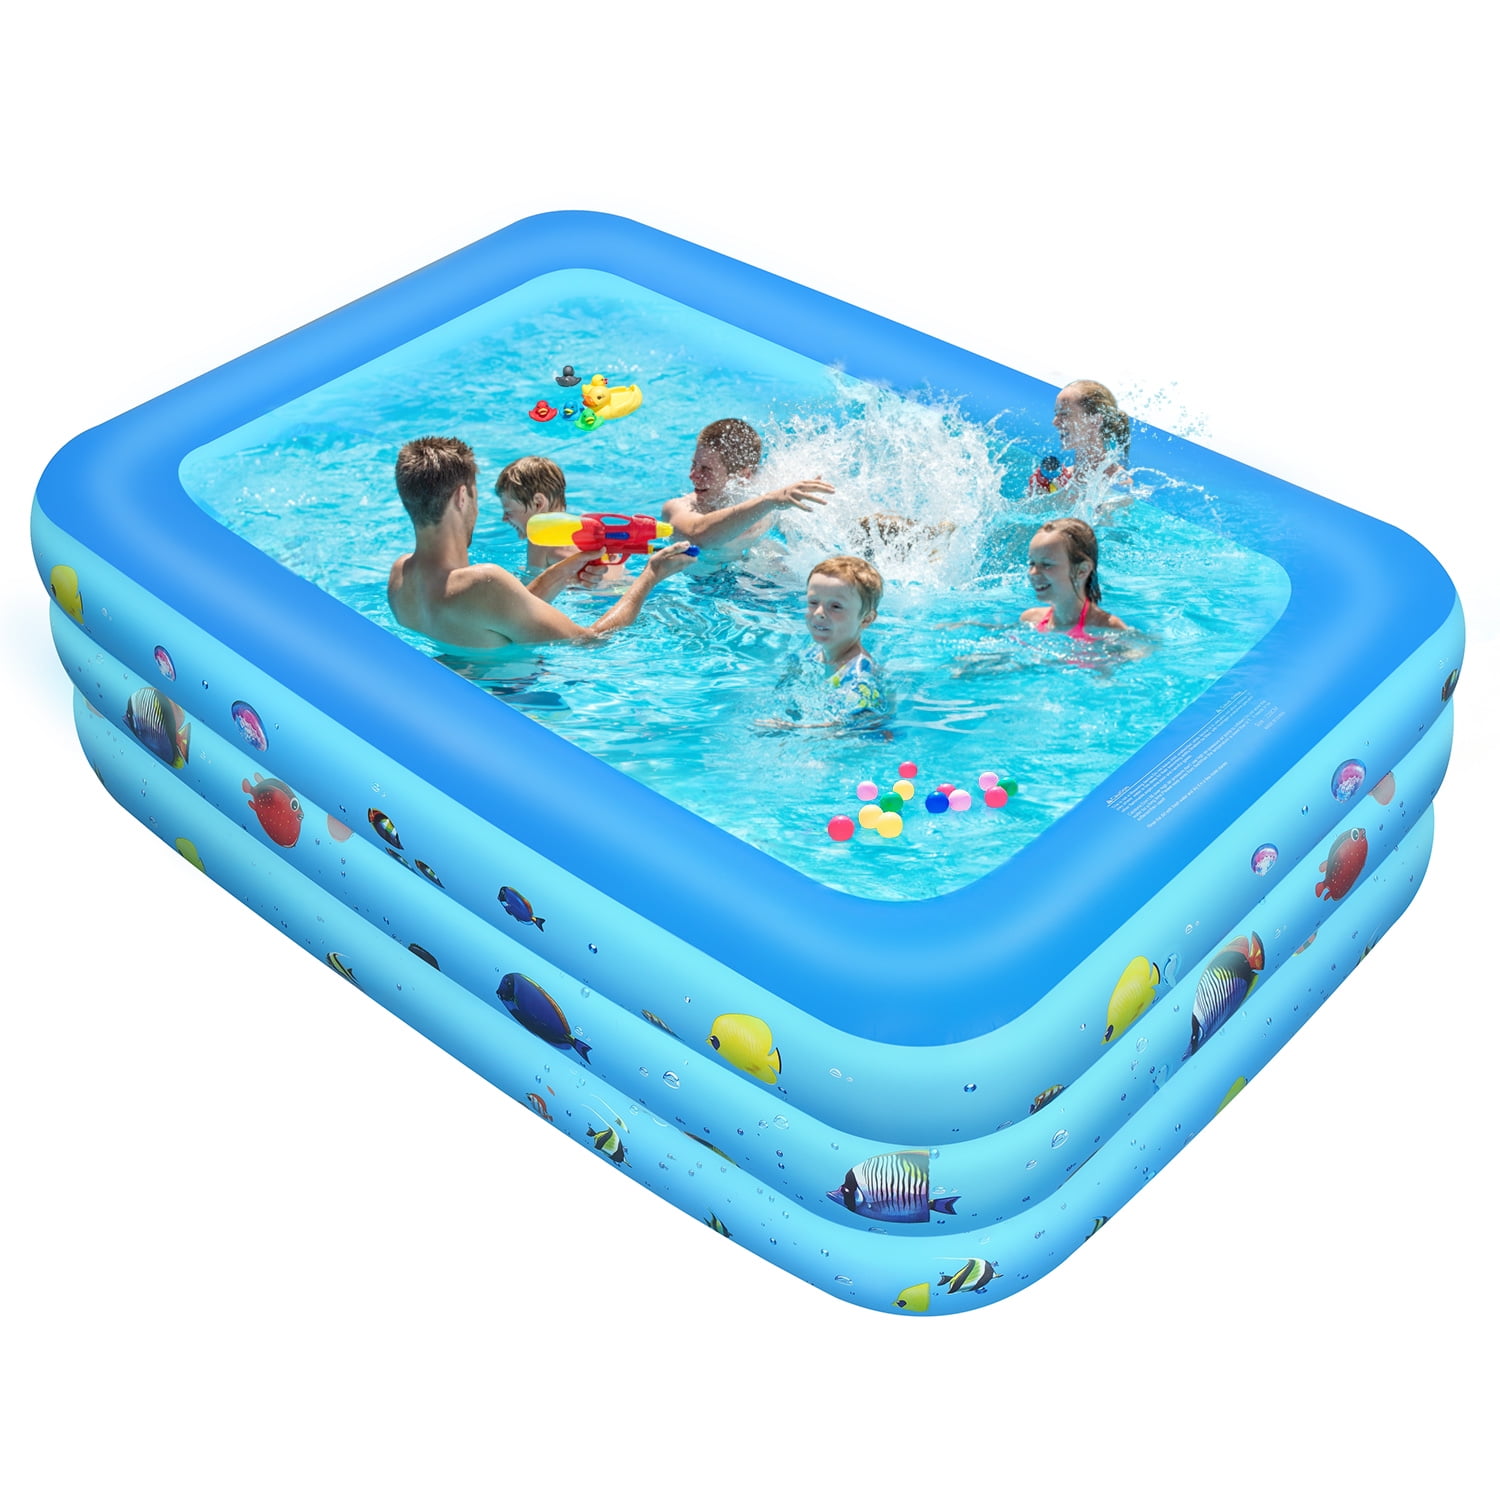 Inflatable Pool, Durable Thickened Blow up Kiddie Pool for Kids, Toddlers and Adults, BPA-Free Family Swimming Pool, 6.9 x 5 x 1.8 ft, Blue